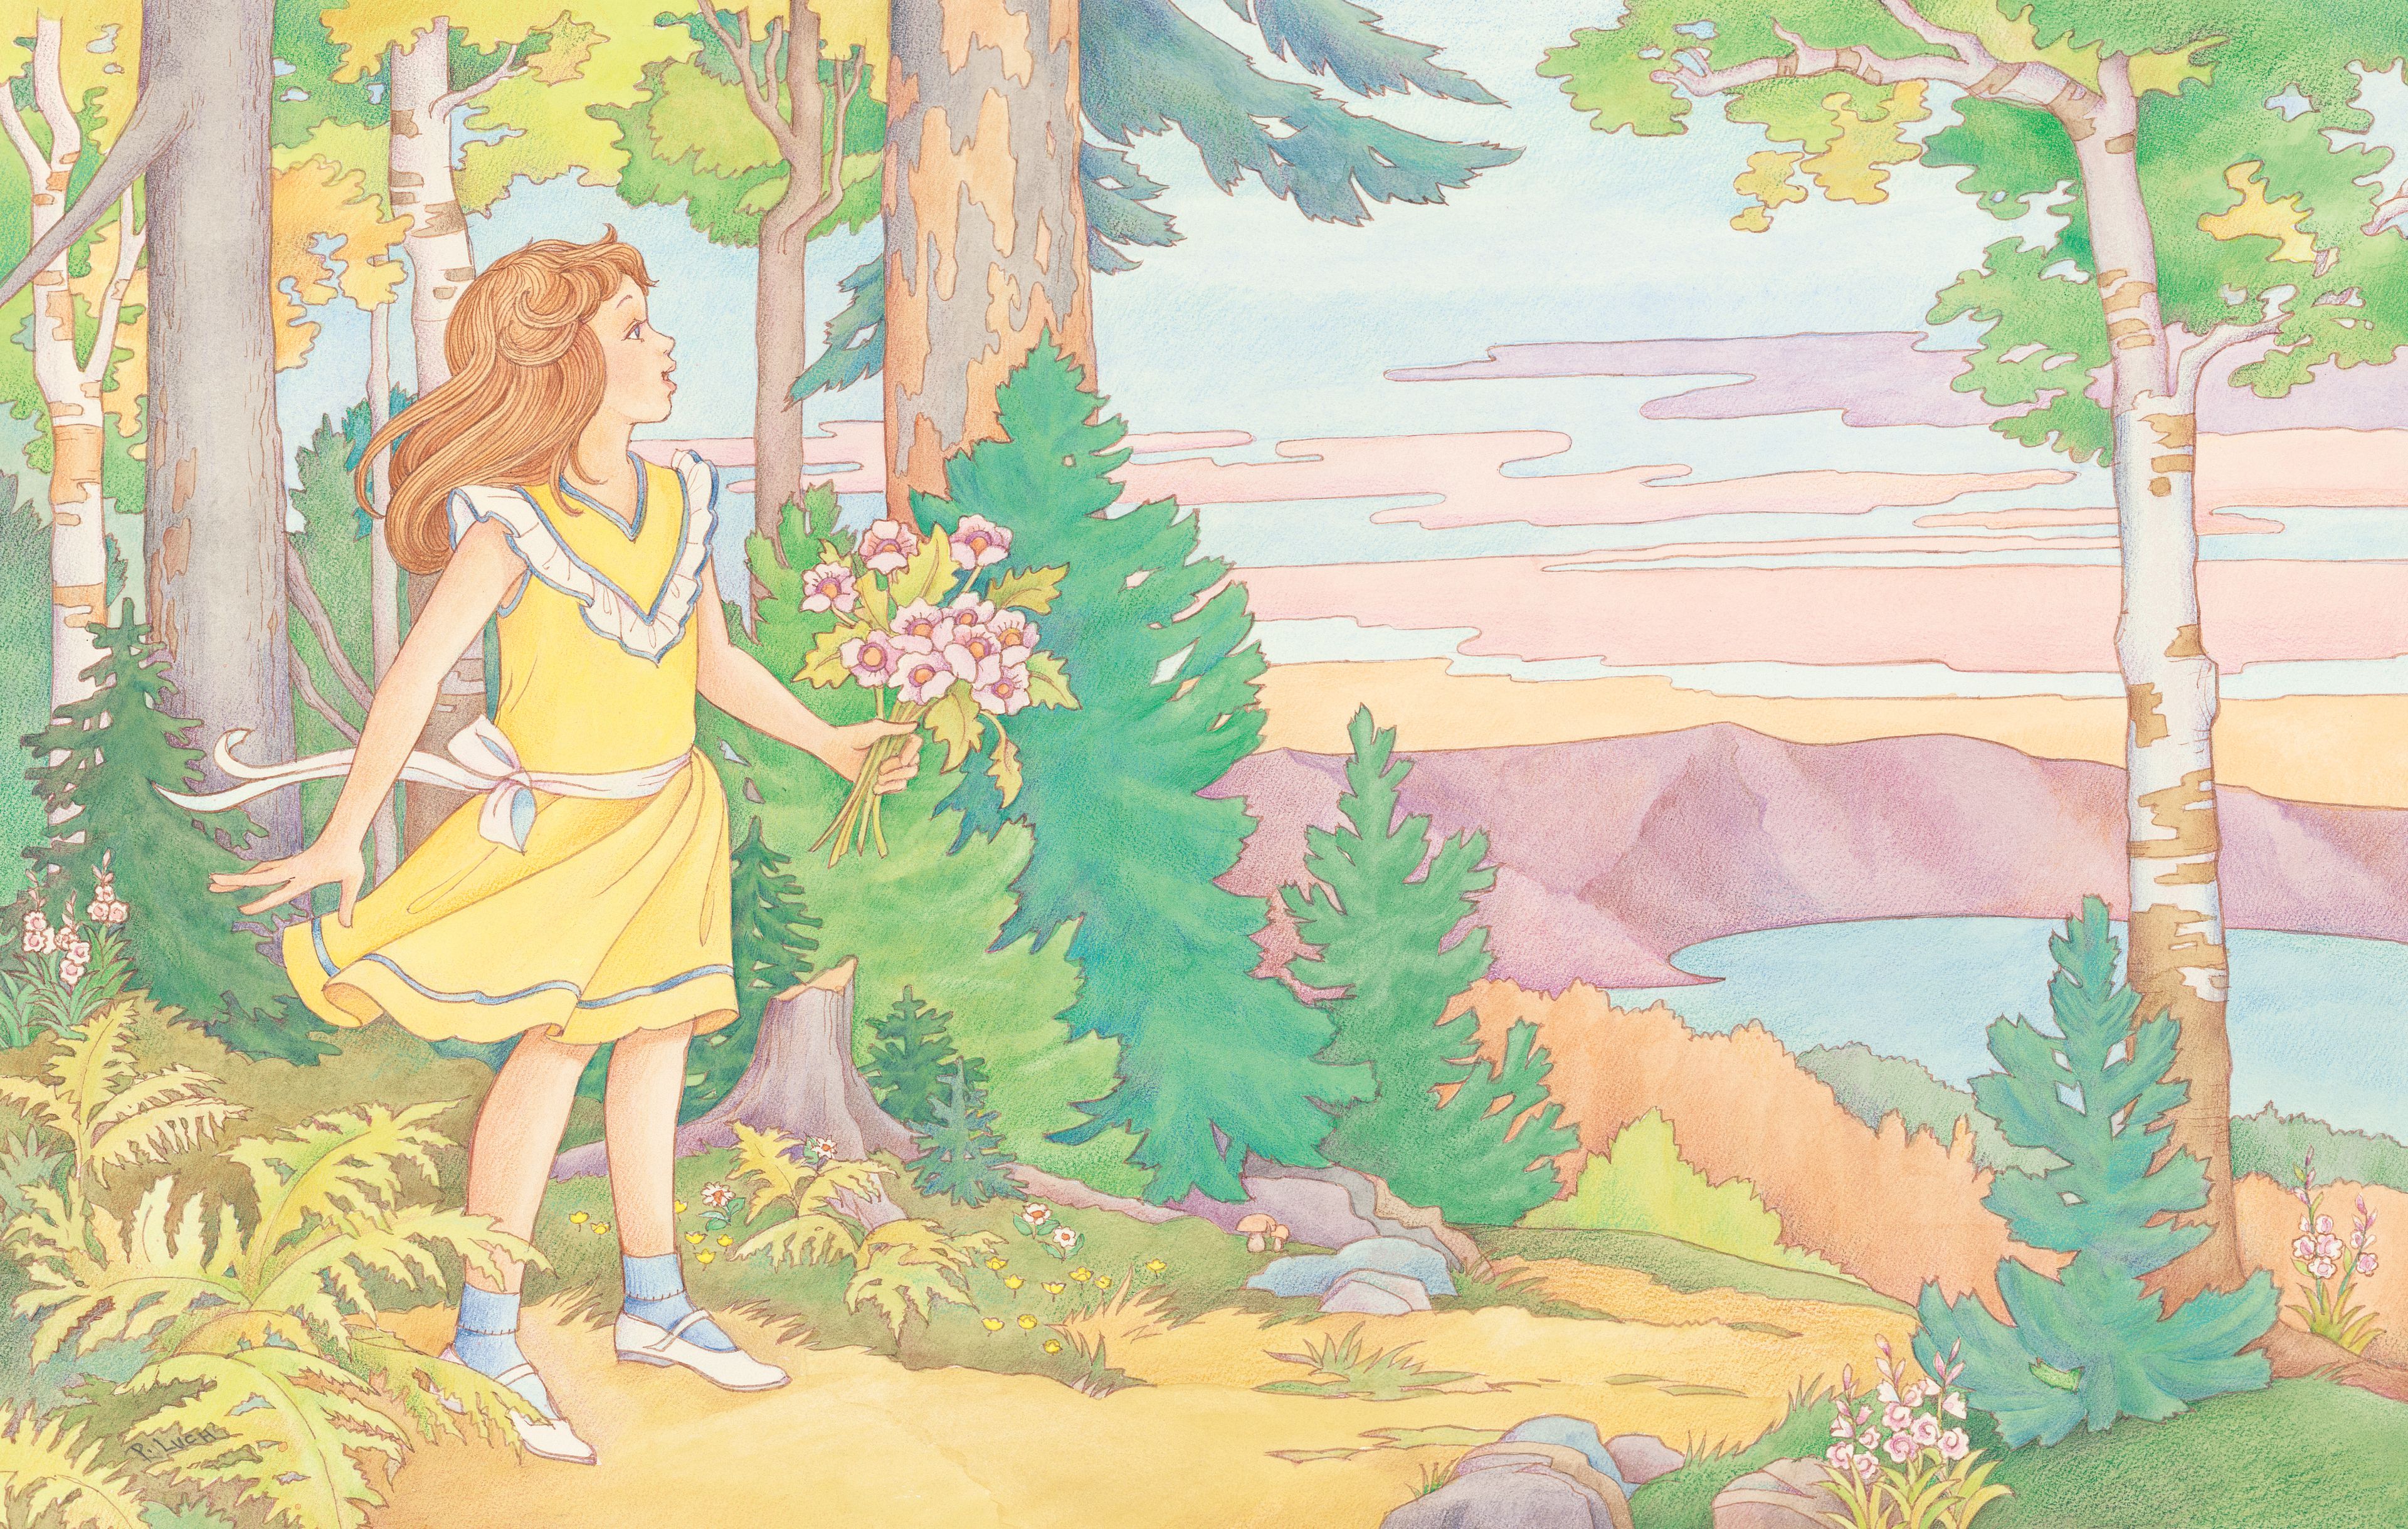 A girl wearing a yellow dress, standing in a forest. From the section “My Heavenly Father” in the Children’s Songbook, pages vi–1; watercolor illustration by Phyllis Luch.